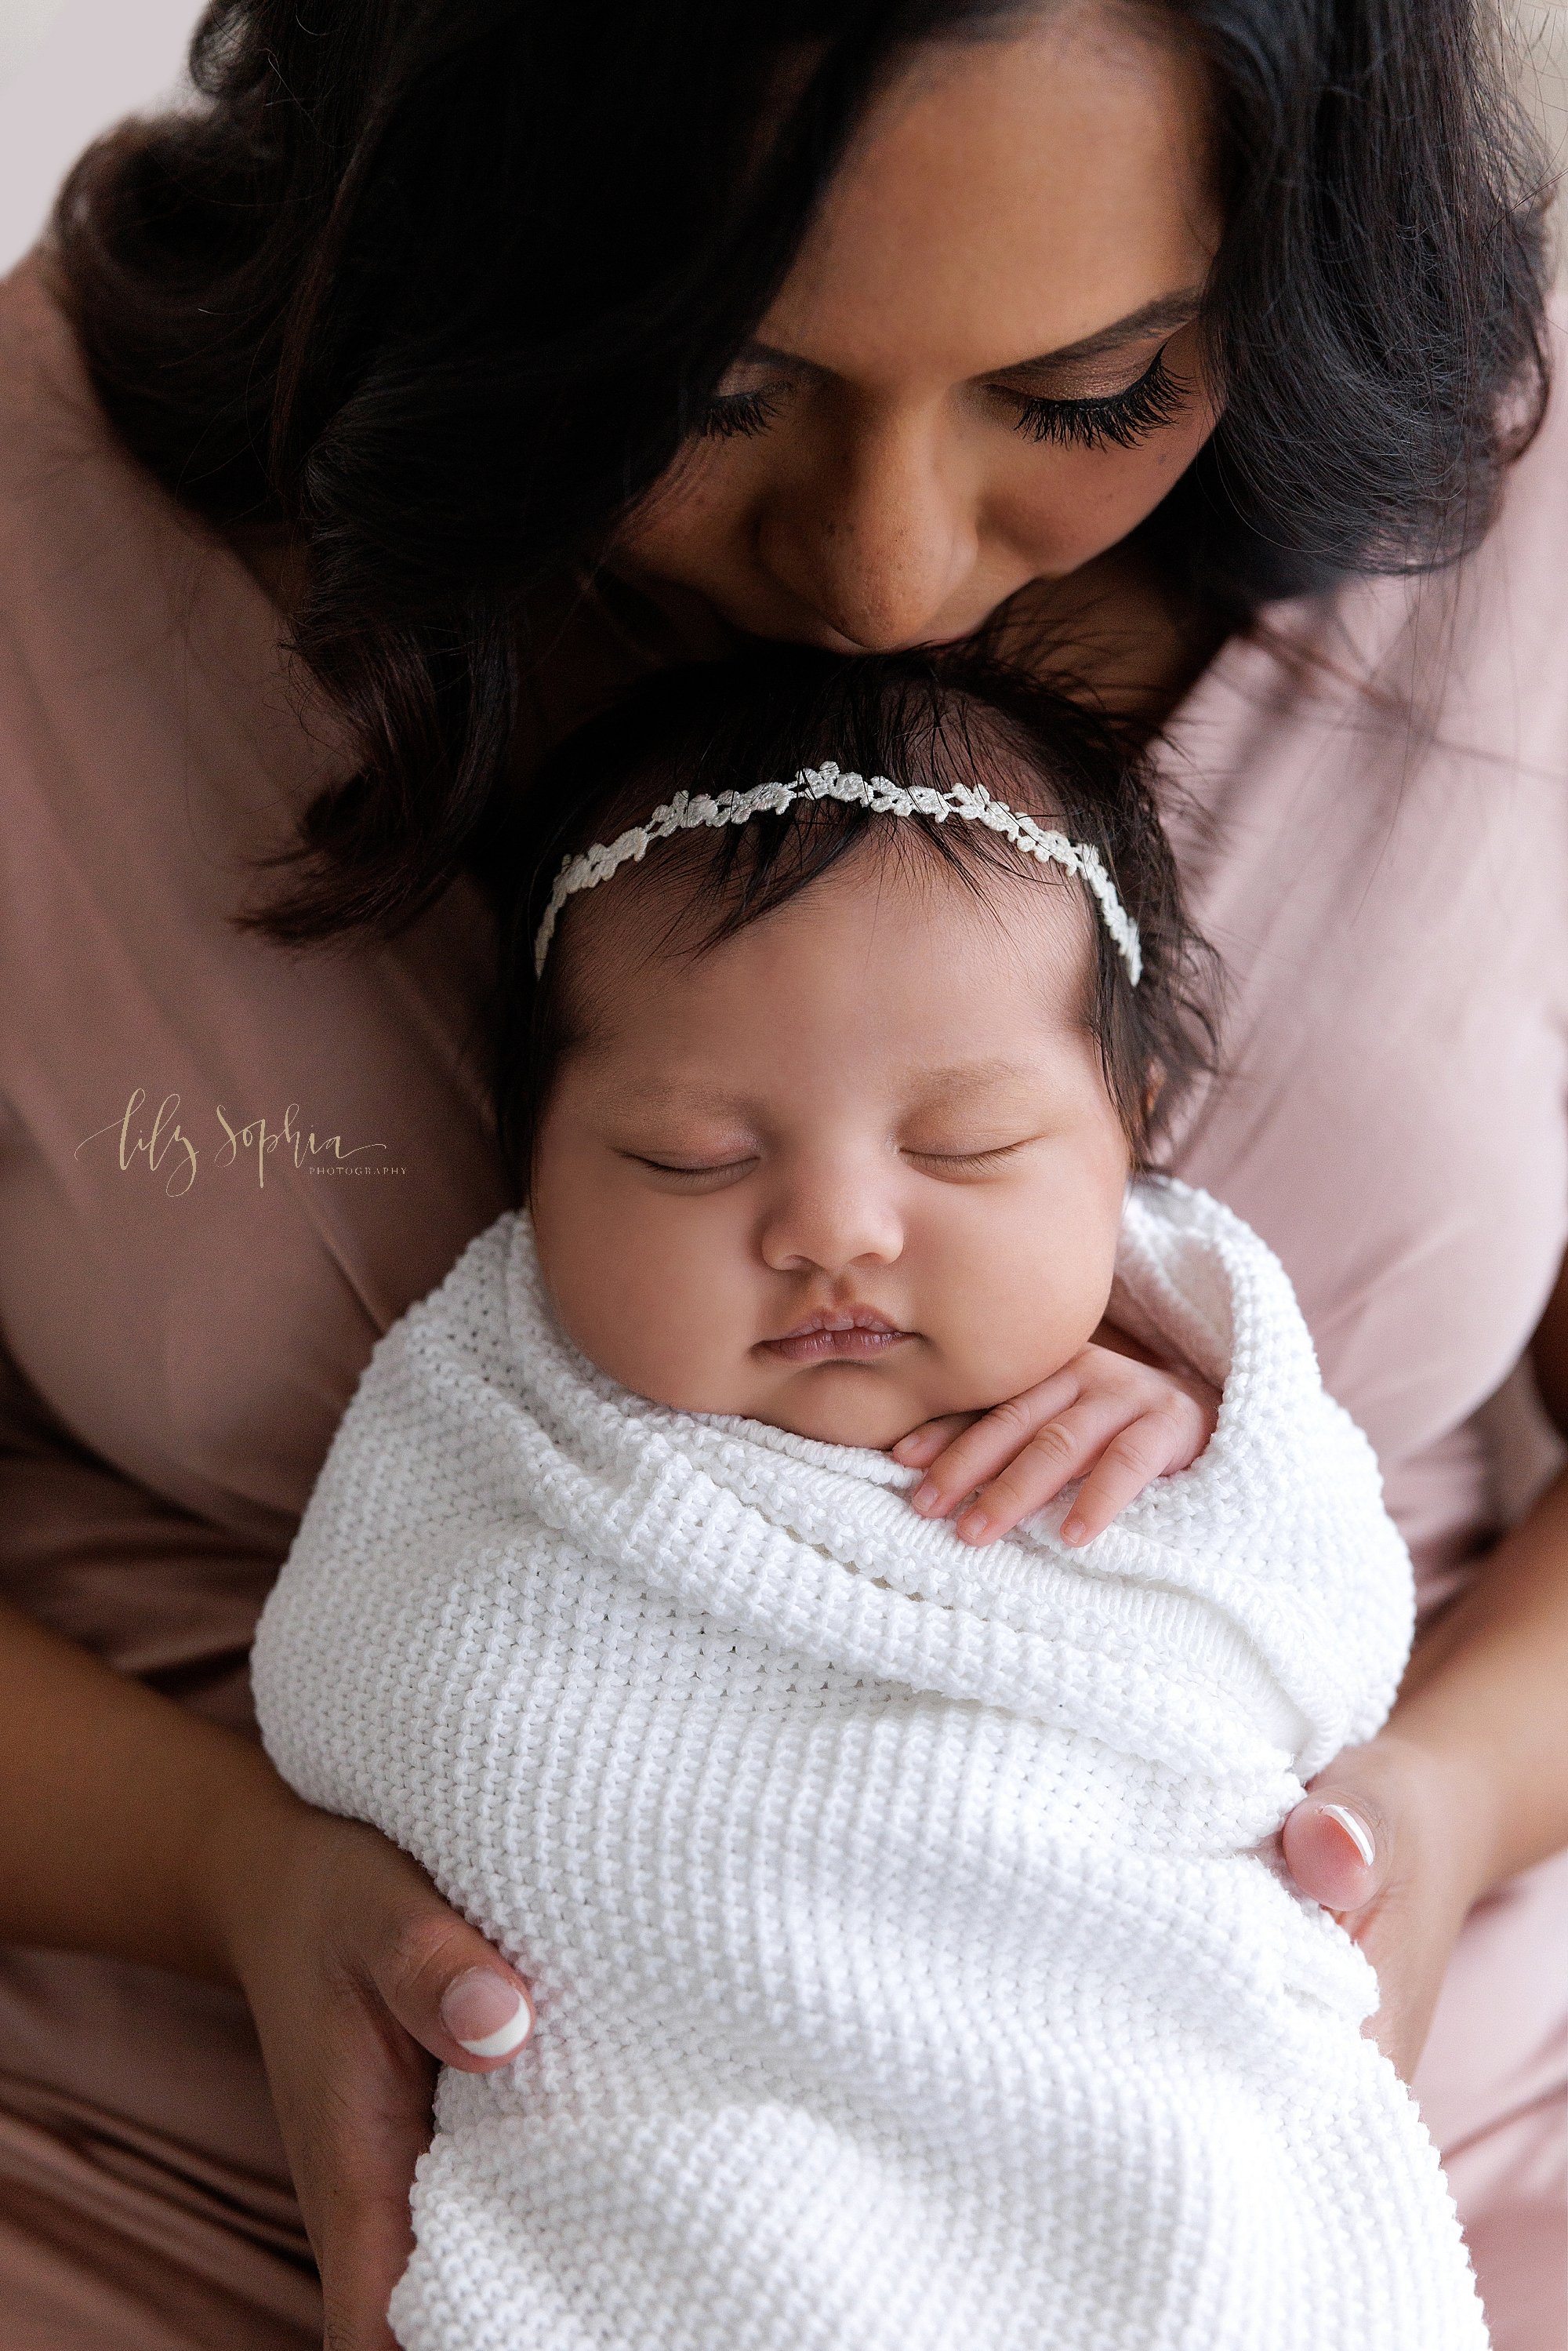  Newborn portrait or a newborn baby girl wrapped in a soft white blanket and wearing a delicate laurel headband in her black hair as her mother holds her on her lap and kisses the crown of her head taken in a studio that uses natural light near Morni